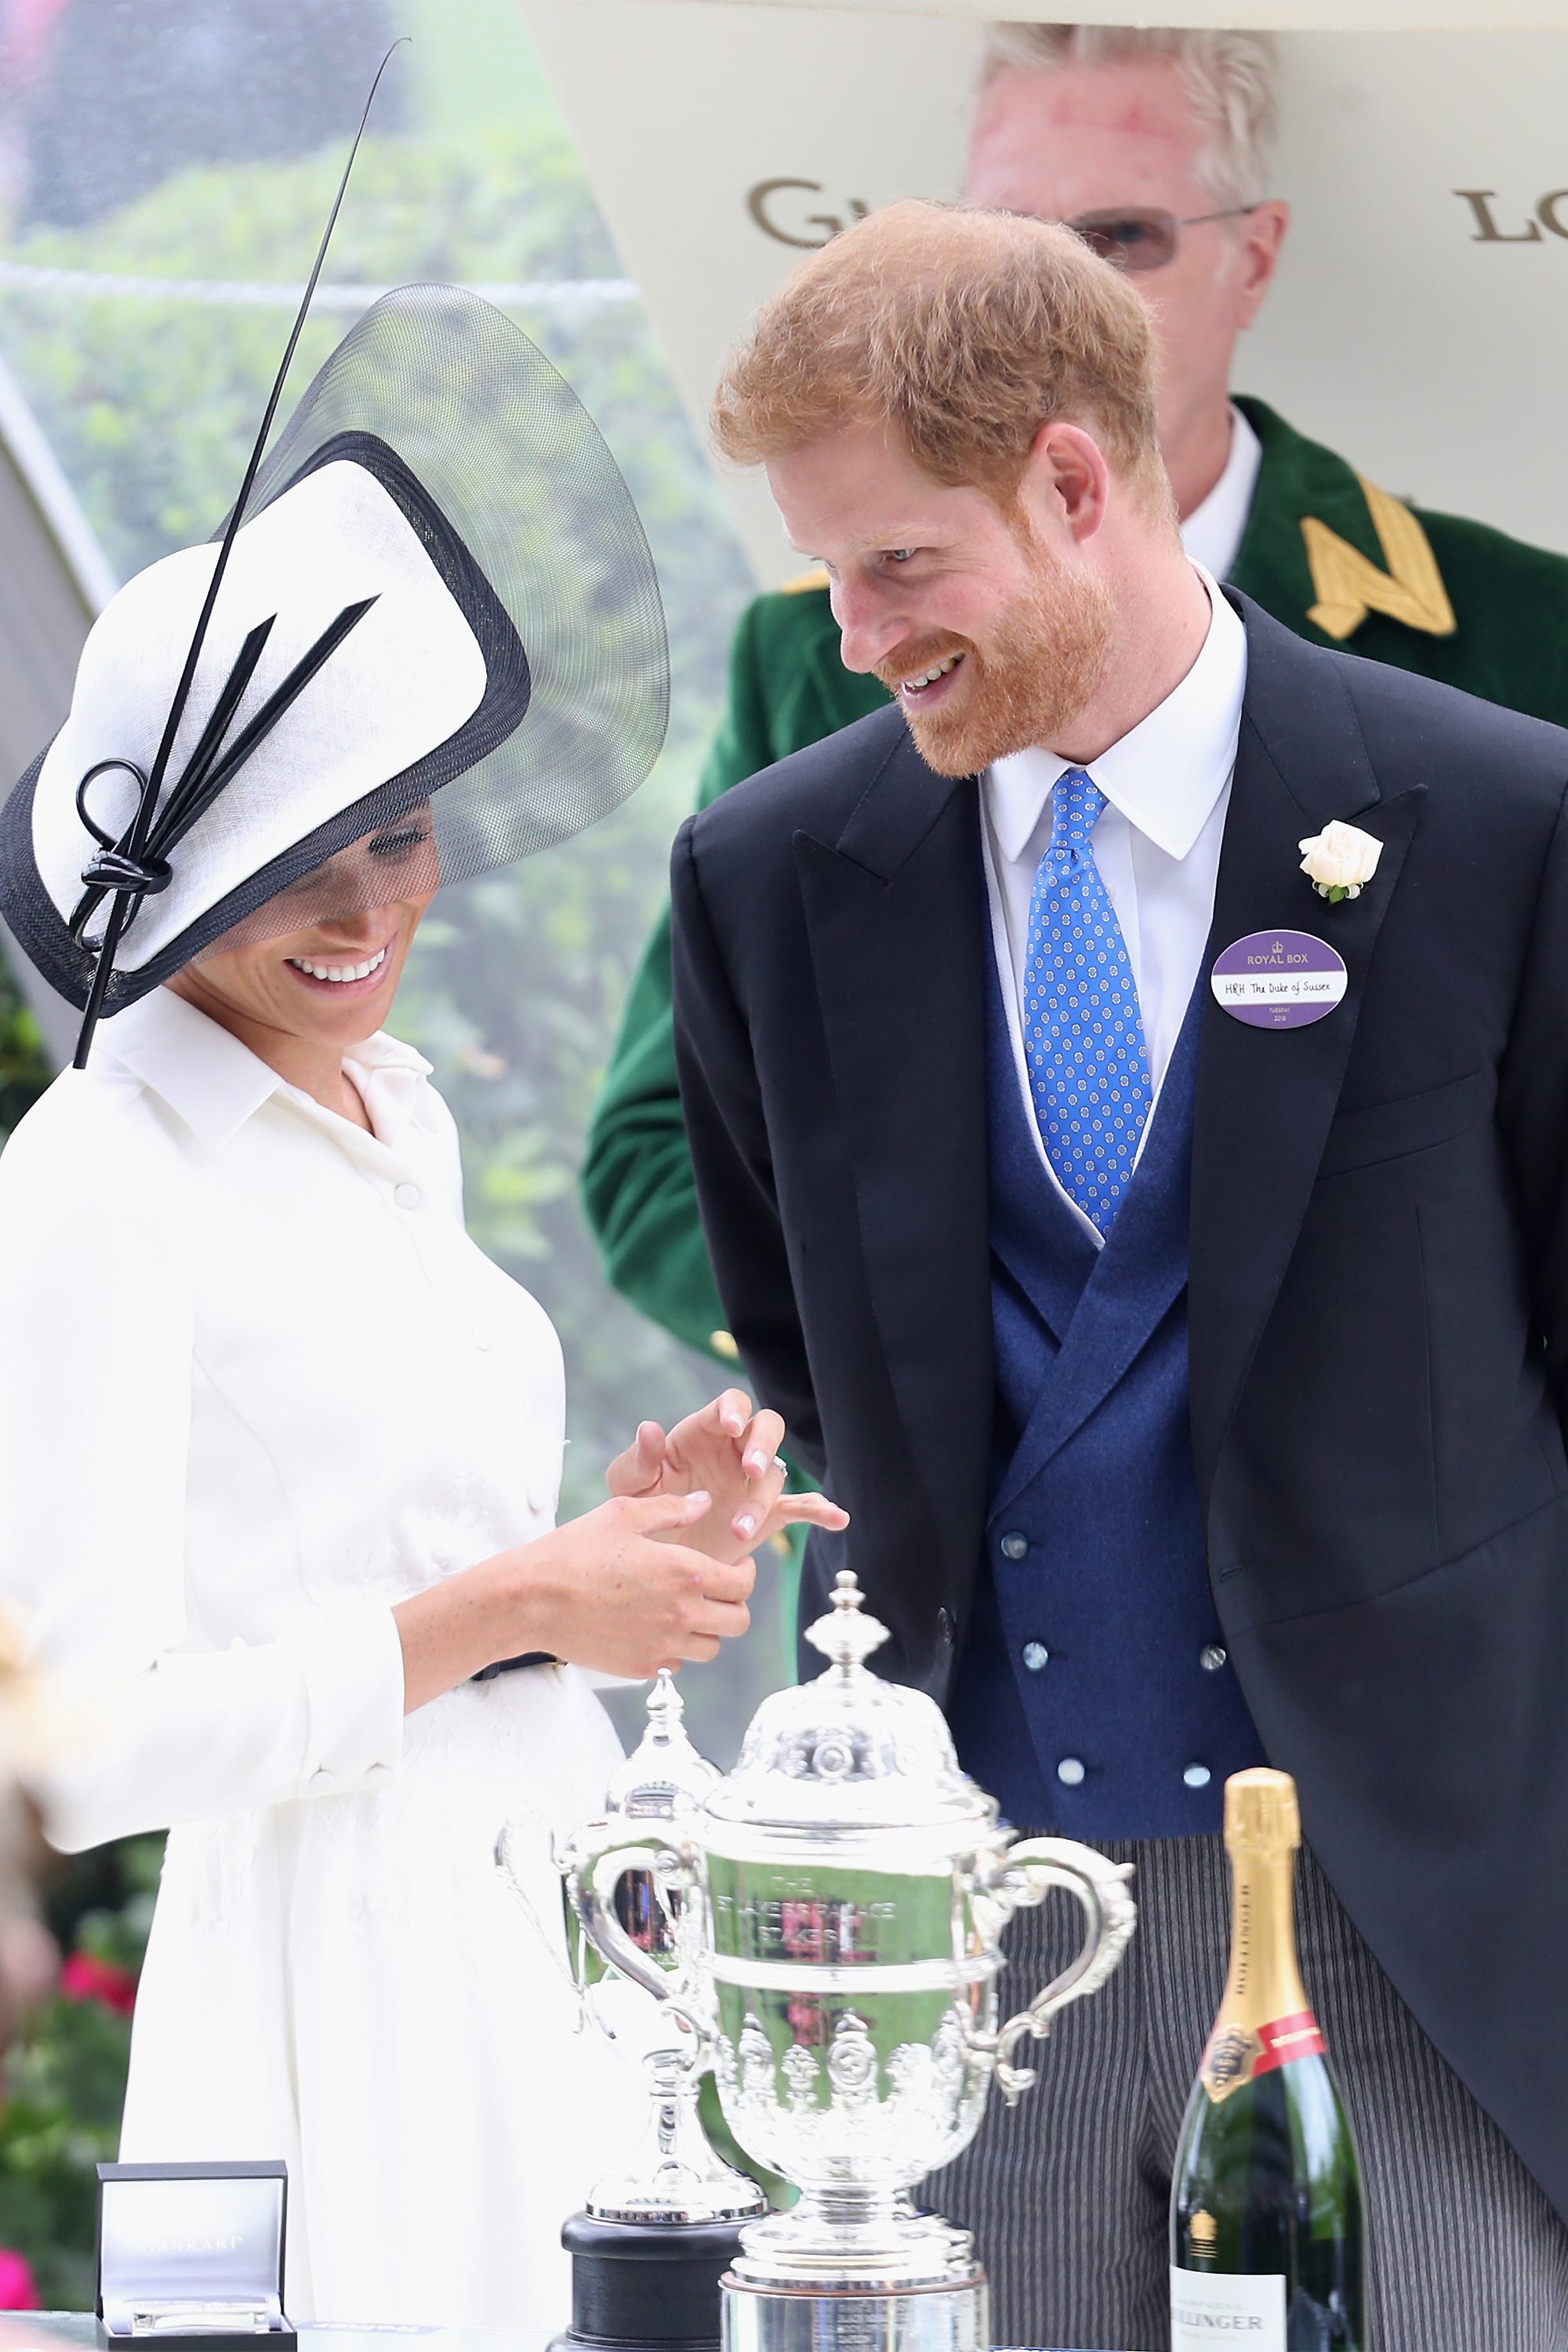 https://hips.hearstapps.com/hmg-prod.s3.amazonaws.com/images/hbz-prince-harry-meghan-markle-cute-moments-2018-06-gettyimages-979403482-1557334671.jpg?crop=1xw:1xh;center,top